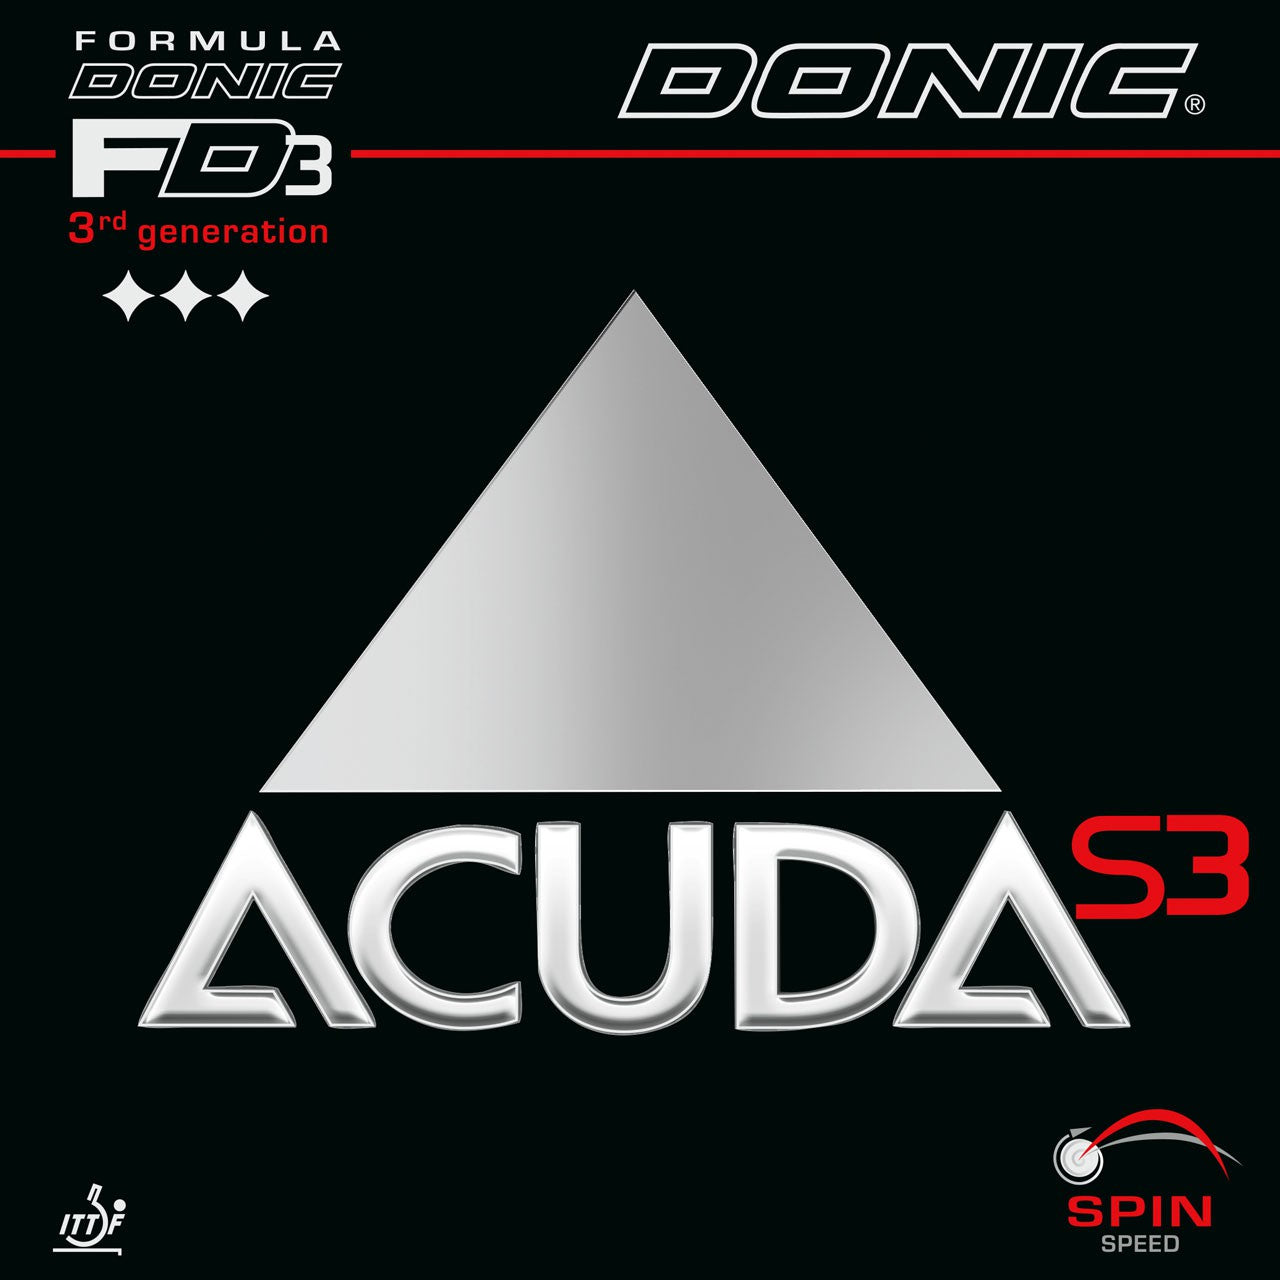 DONIC ACUDA S3 (多尼克阿酷達S3)